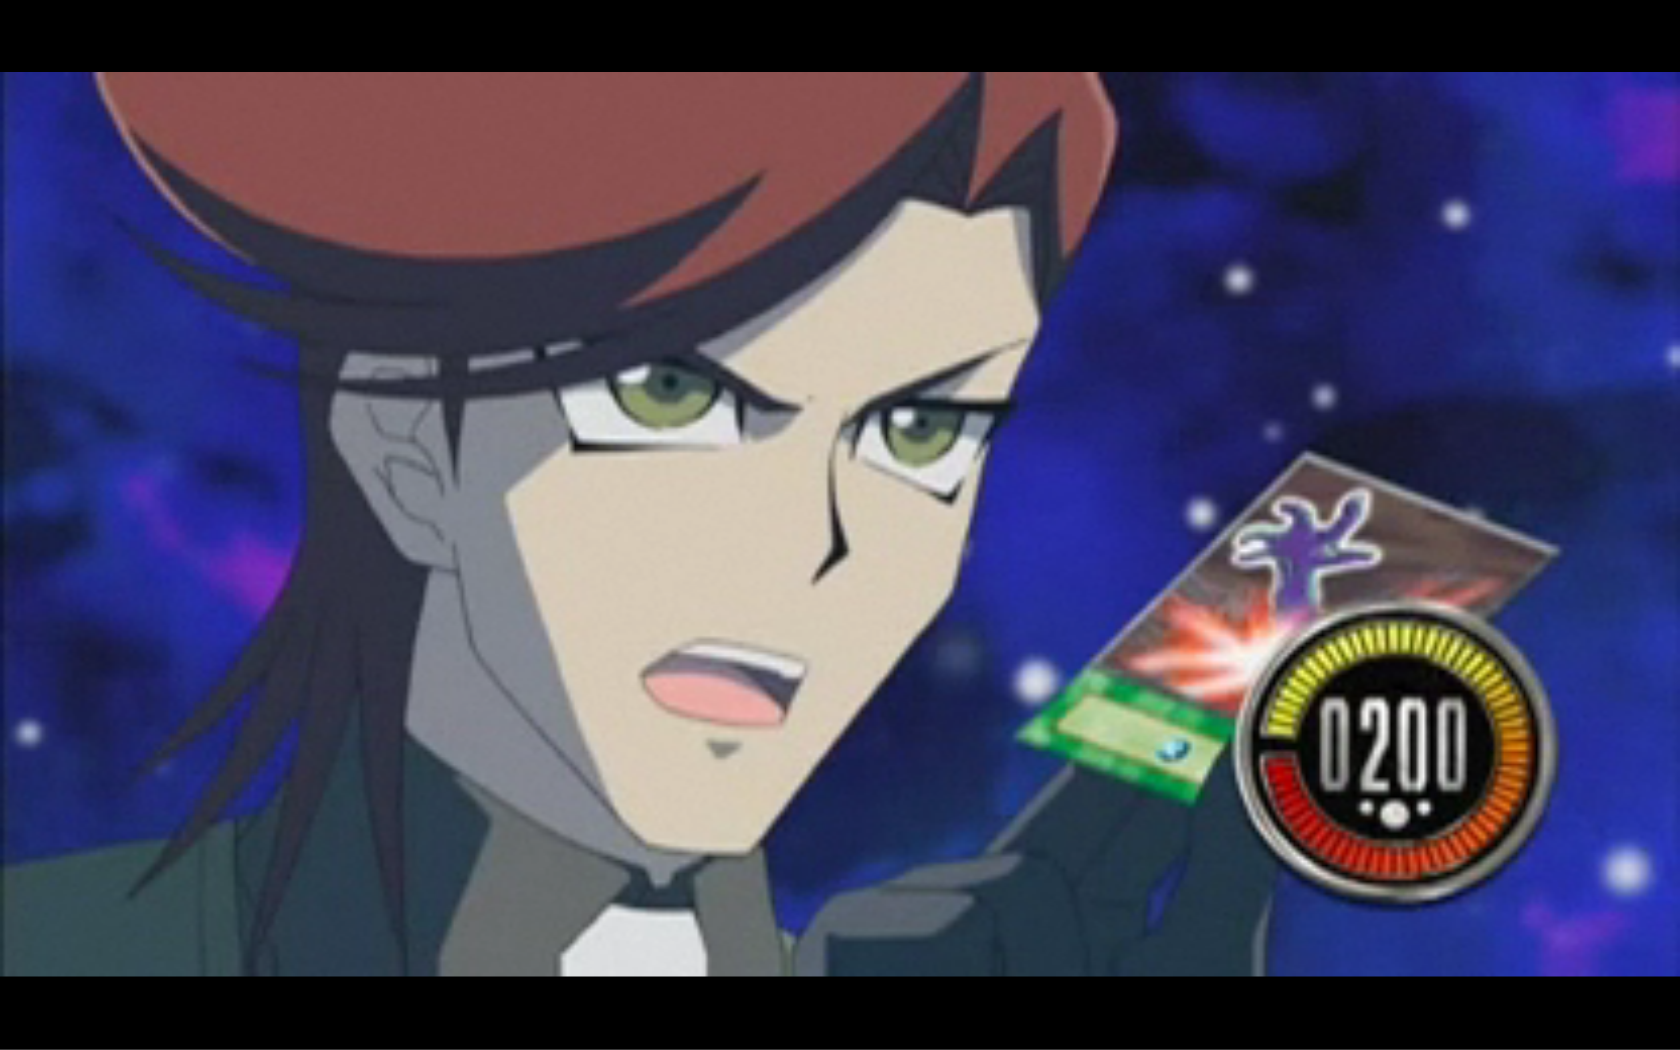 Yu Gi Oh 5Ds Ep 39: The More the Merrier! :'D